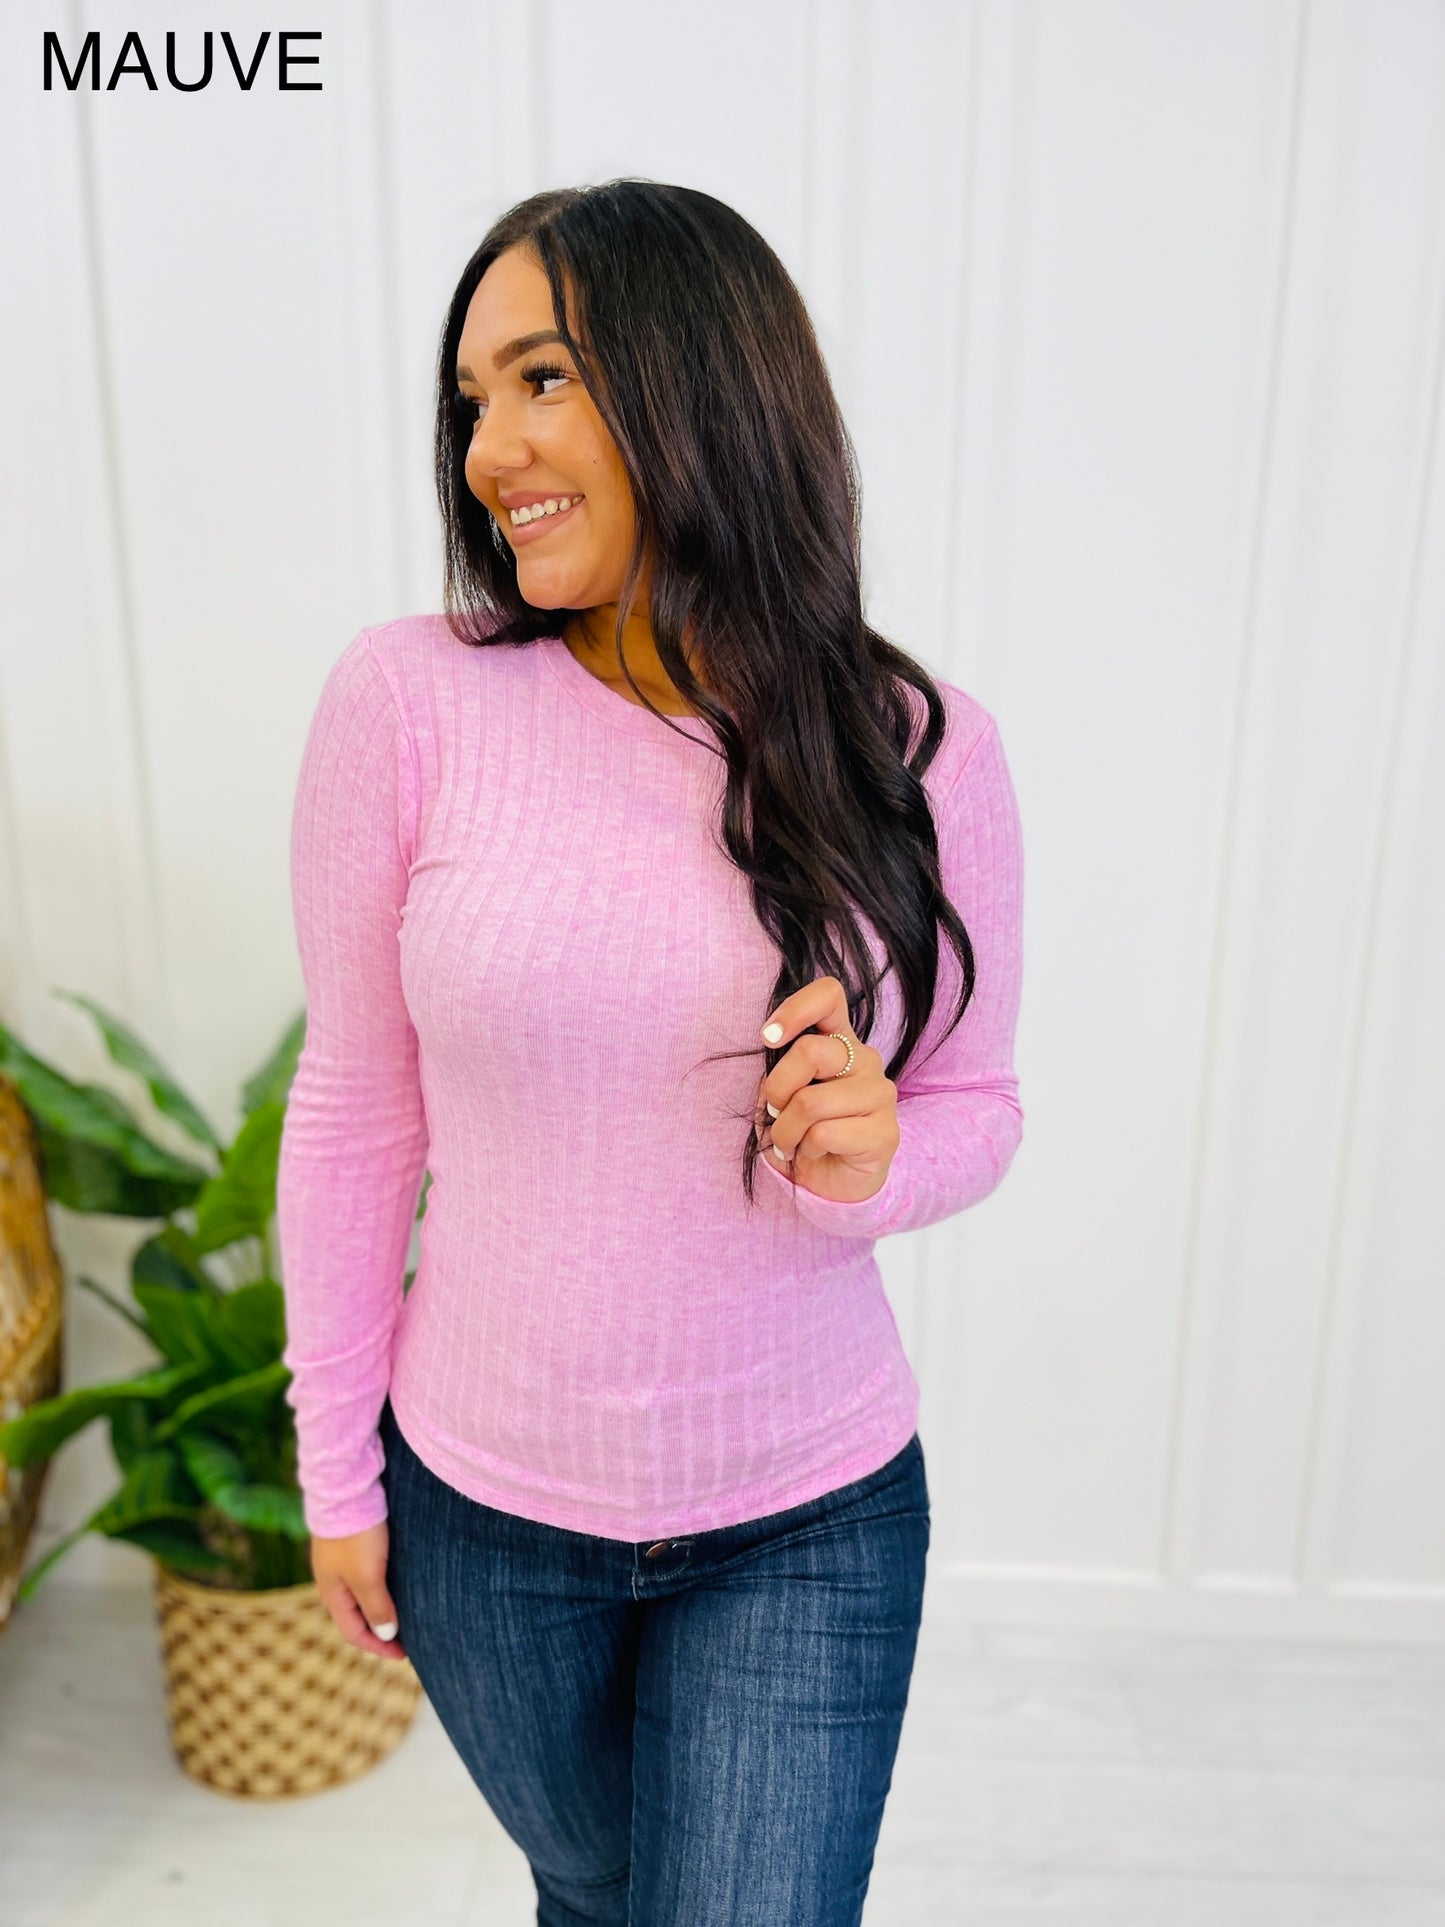 DOORBUSTER! Always Asking For More Sweater- Multiple Colors!